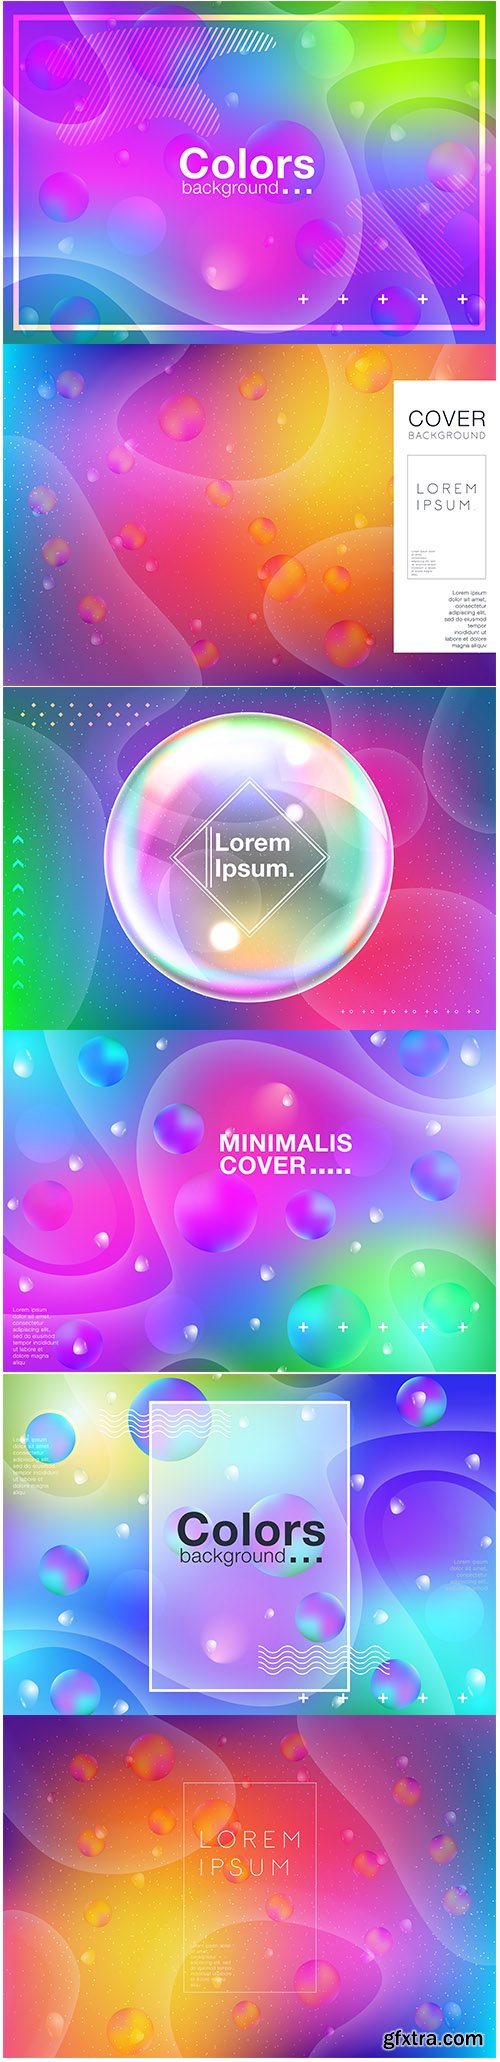 Vector Set of Abstract Background with Gradient Fluid Shapes